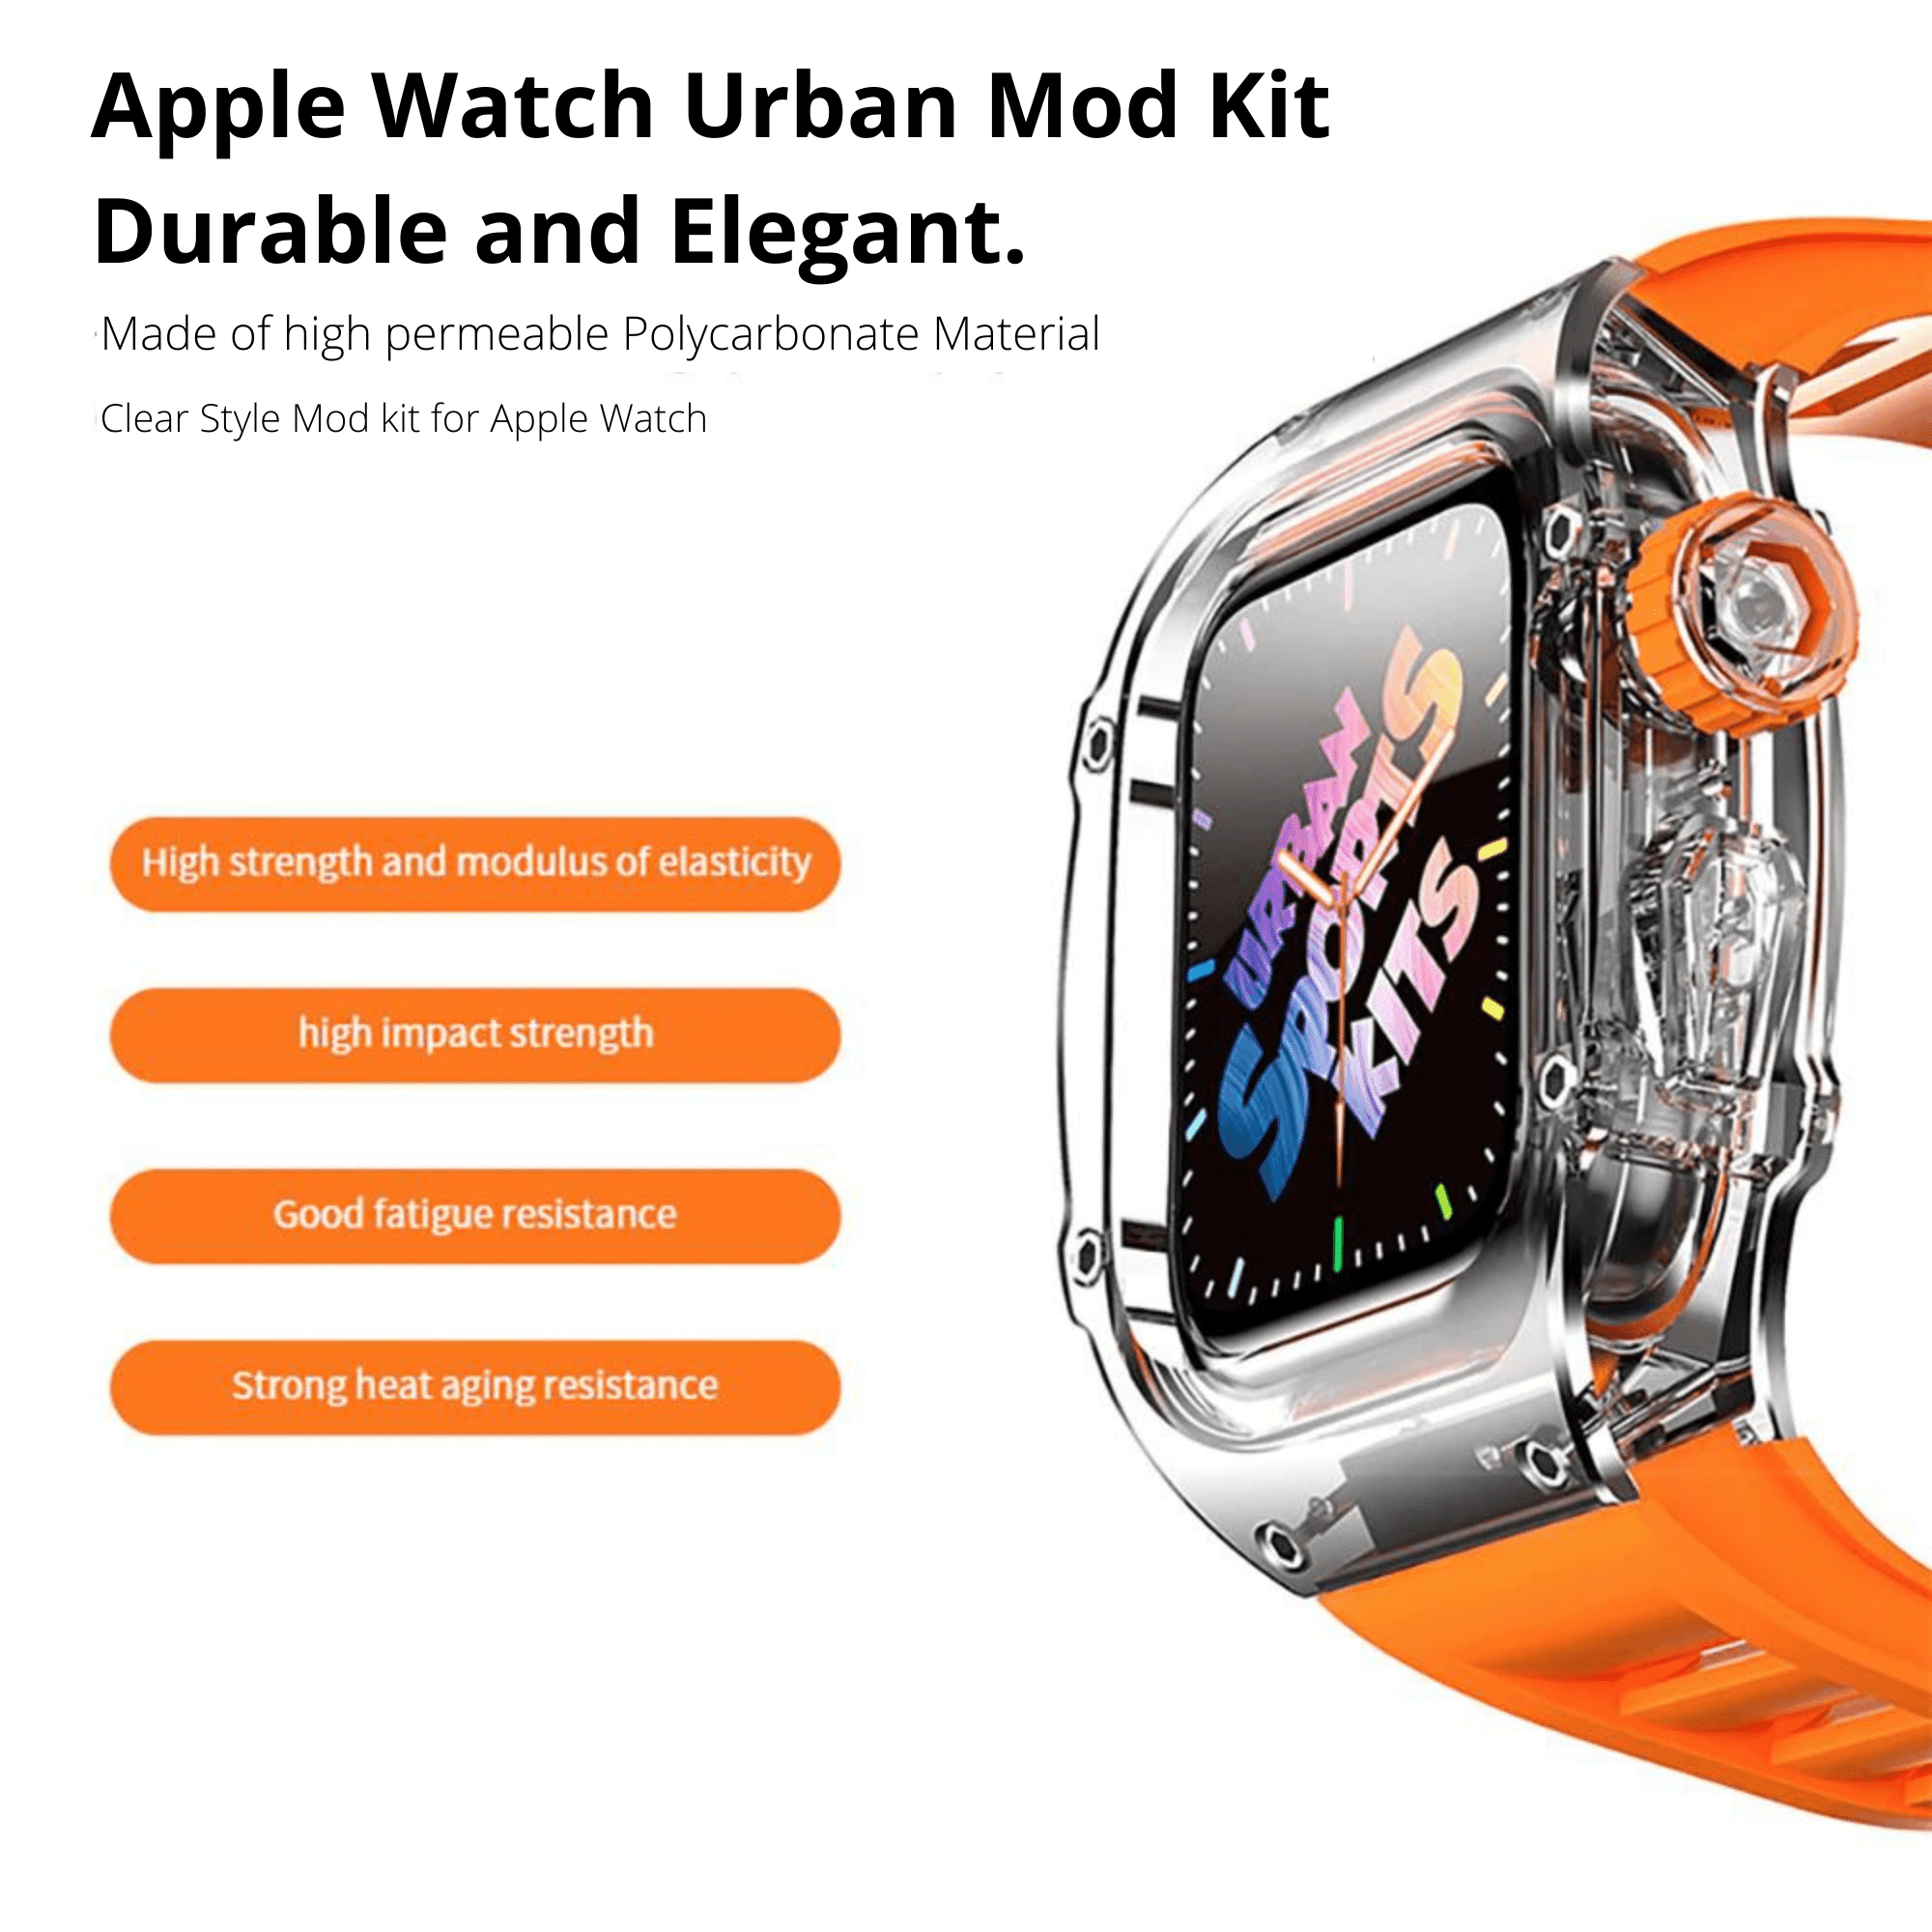 Mod Kit for Apple Watch | Luxury & Sporty Apple Watch Case | Replacement Apple Watch case for SE/3/4/5/6 accessory - 44 mm Carbon Black mod kits india dream watches apple watch